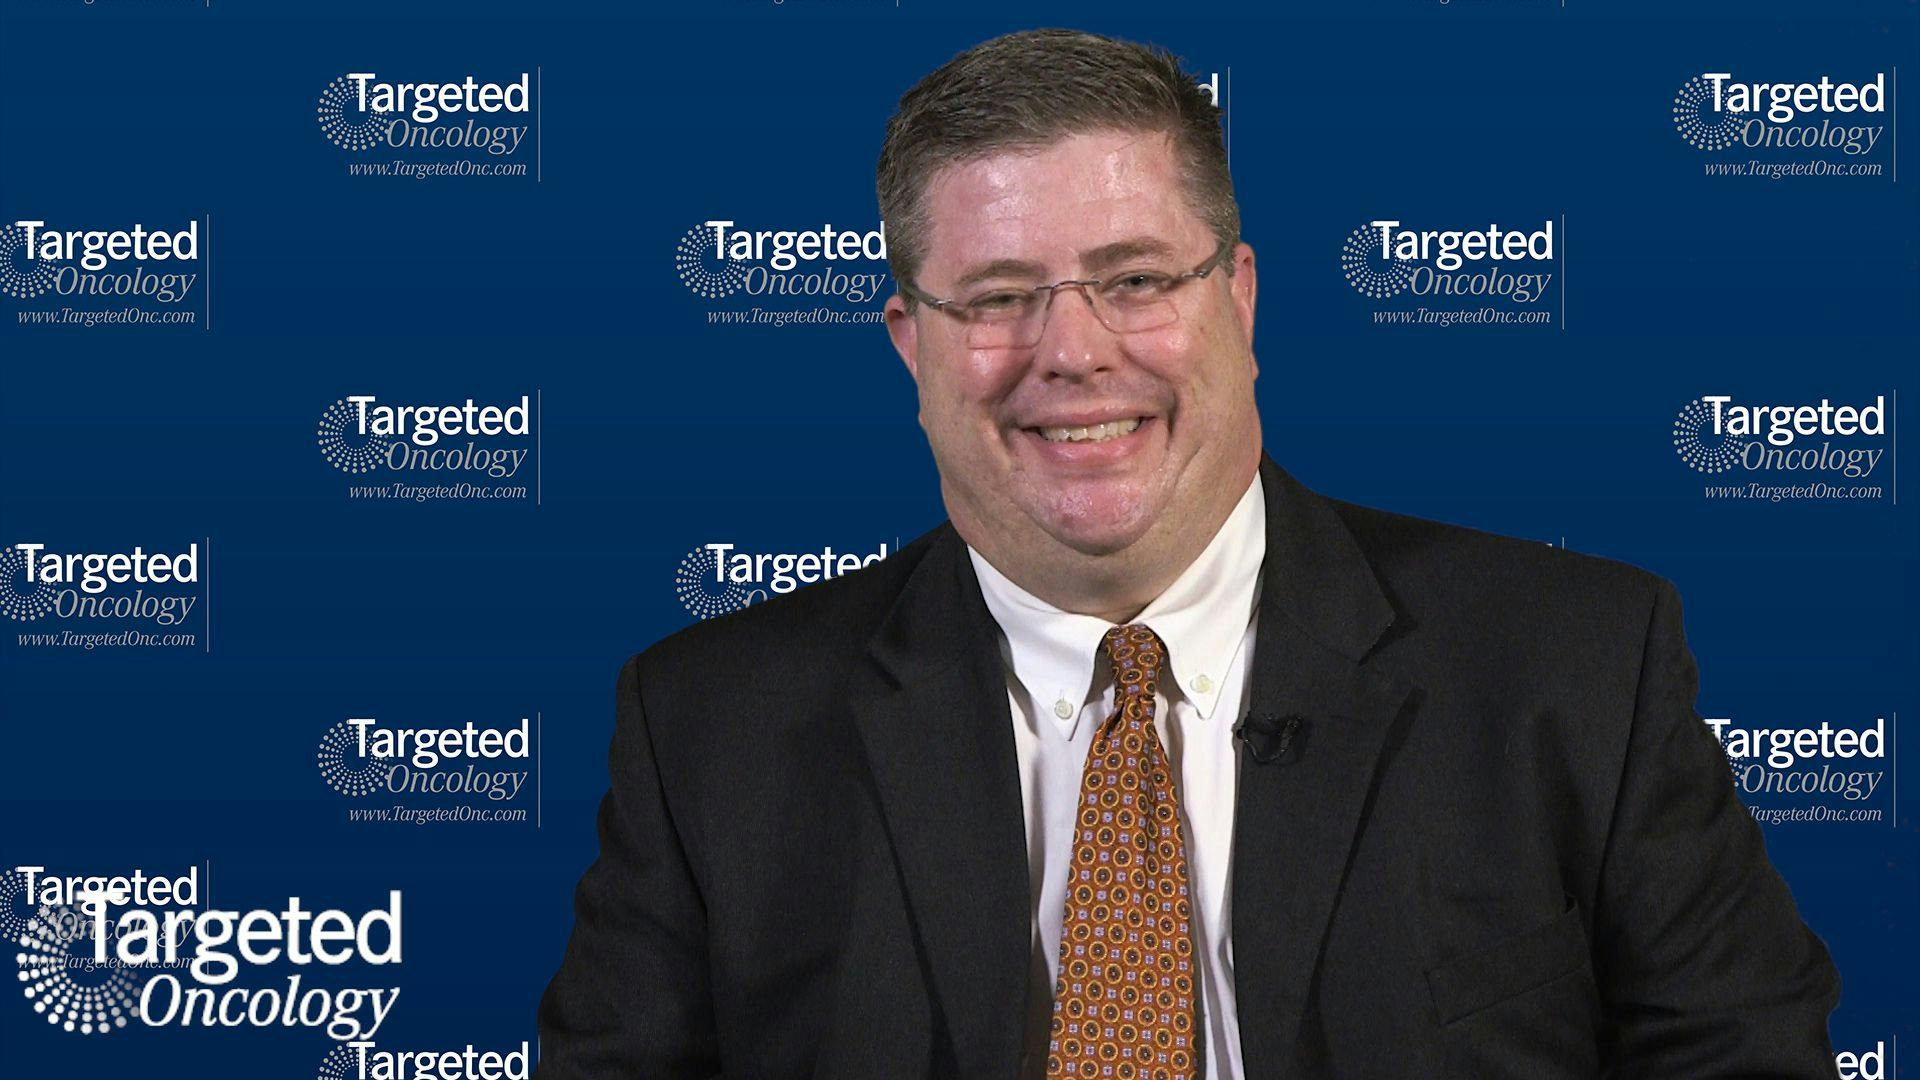 The Therapeutic Approach for Malignant Melanoma: Case 2